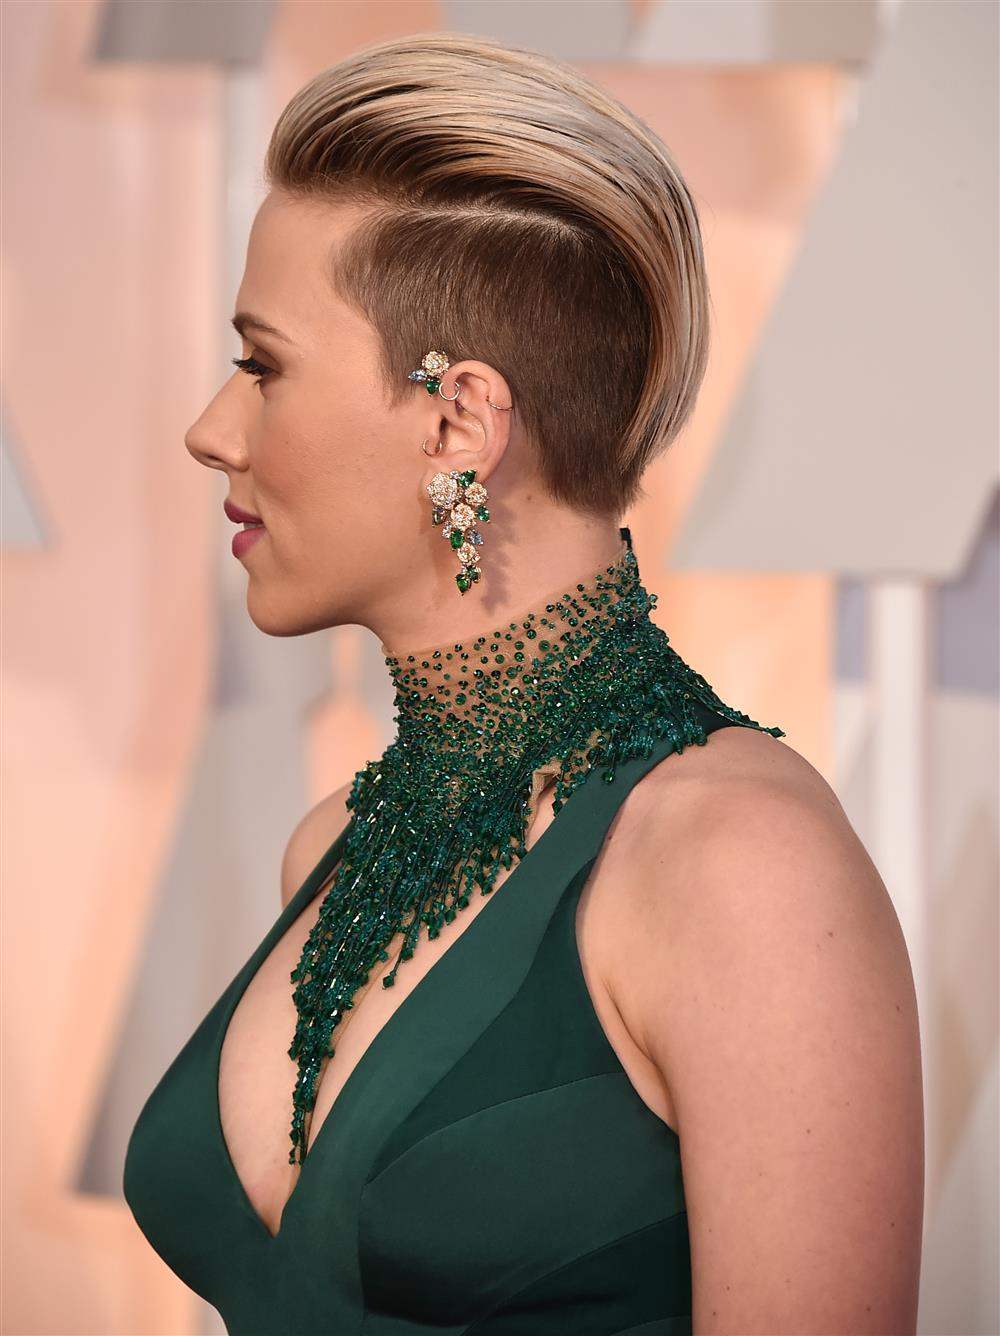 Radical 'Pixie' that Scarlett Johansson now wears.  Only suitable for the strongest personalities